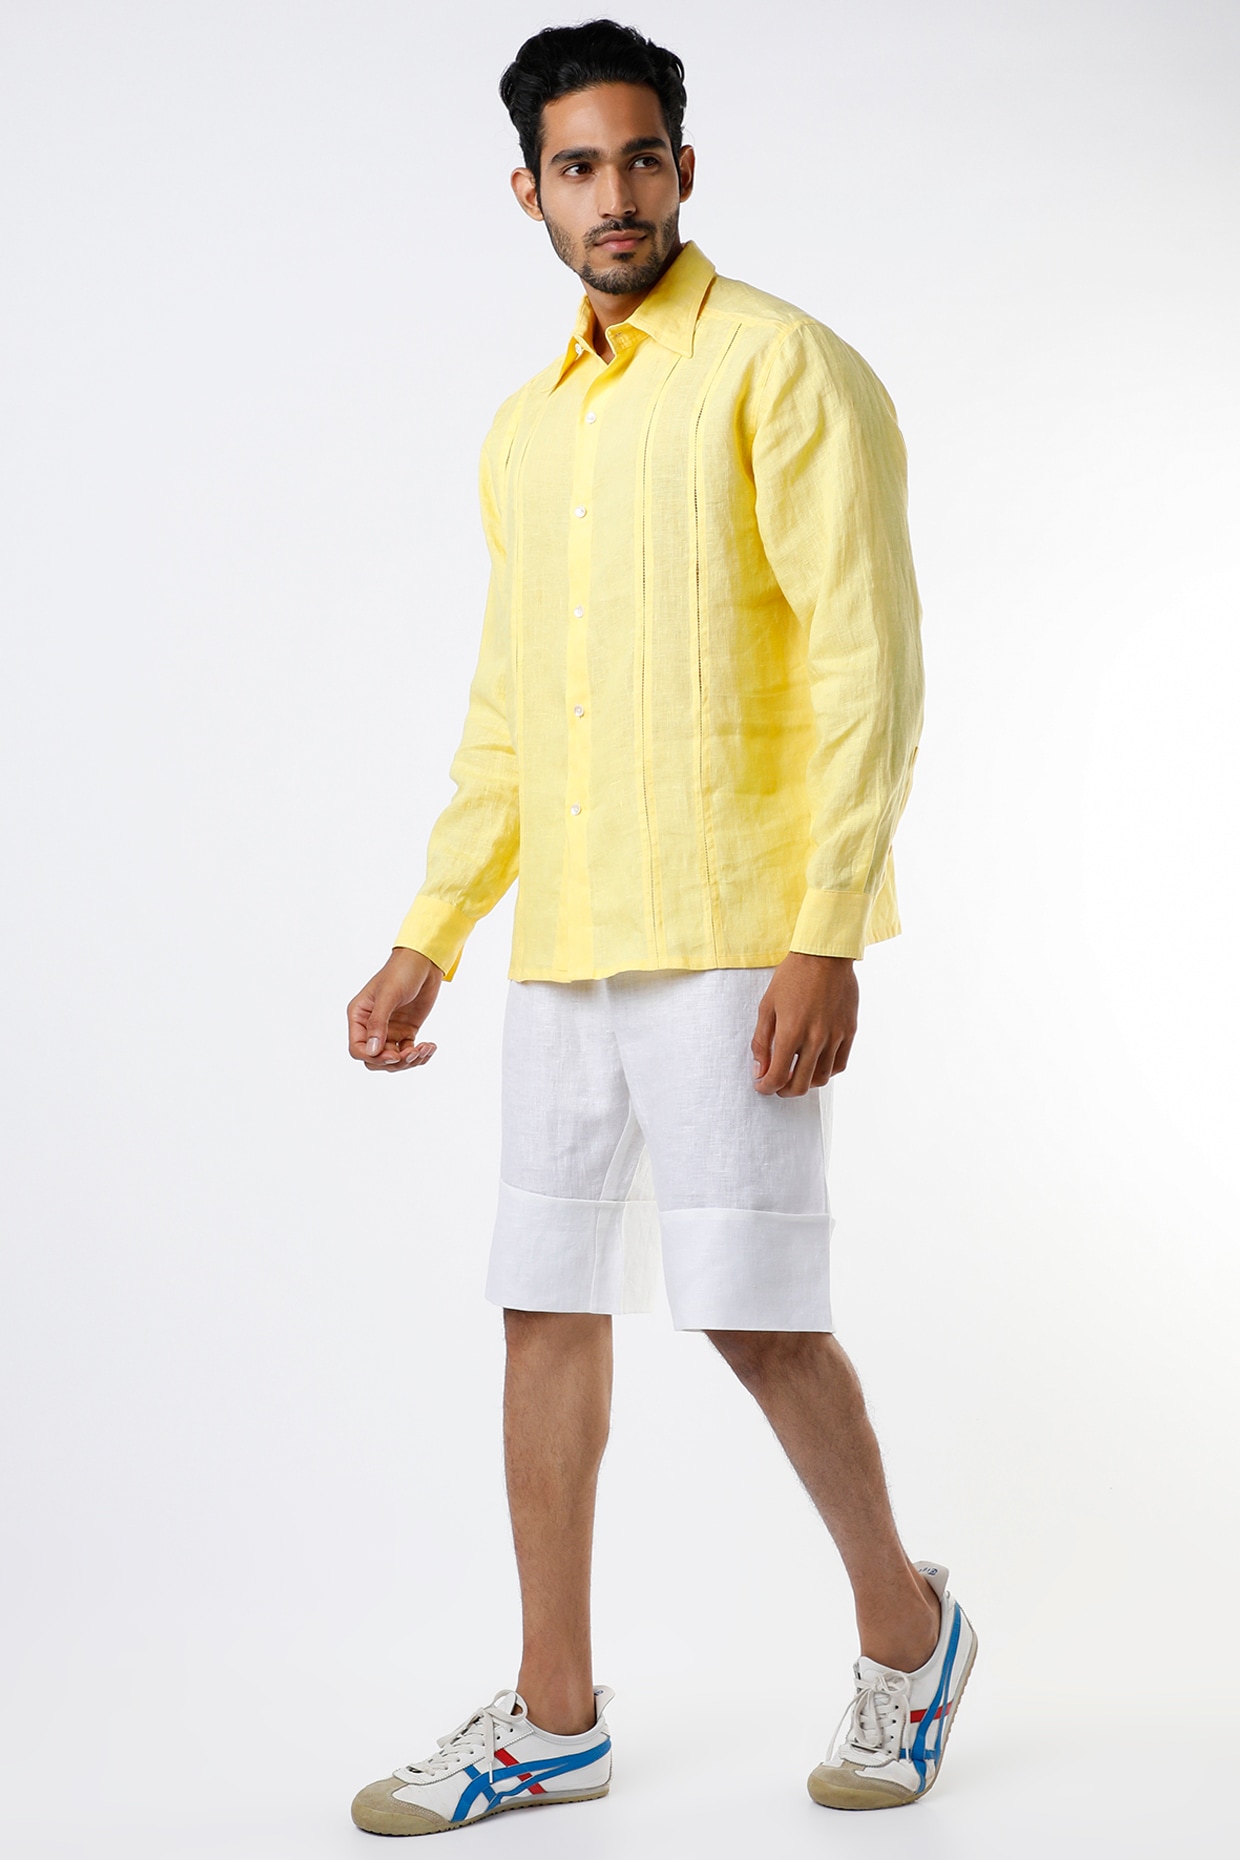 Buy Full Sets Casual Wear Marigold Yellow Shirt with White Pants in Cotton  Clothing for Unisex Jollee